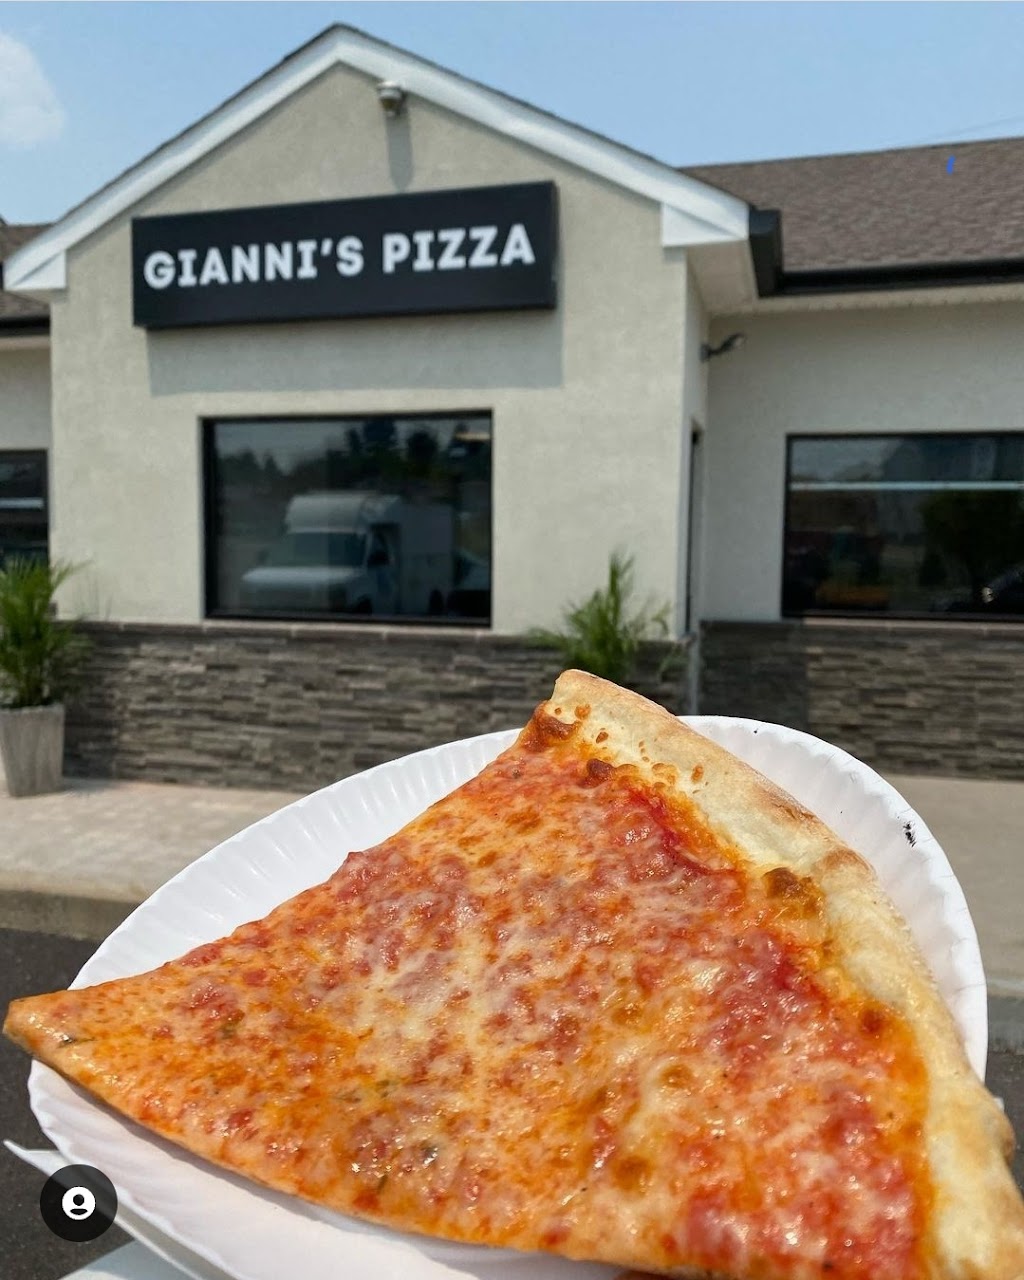 Giannis pizza chalfont | 205 E Butler Ave, Chalfont, PA 18914 | Phone: (267) 308-8939